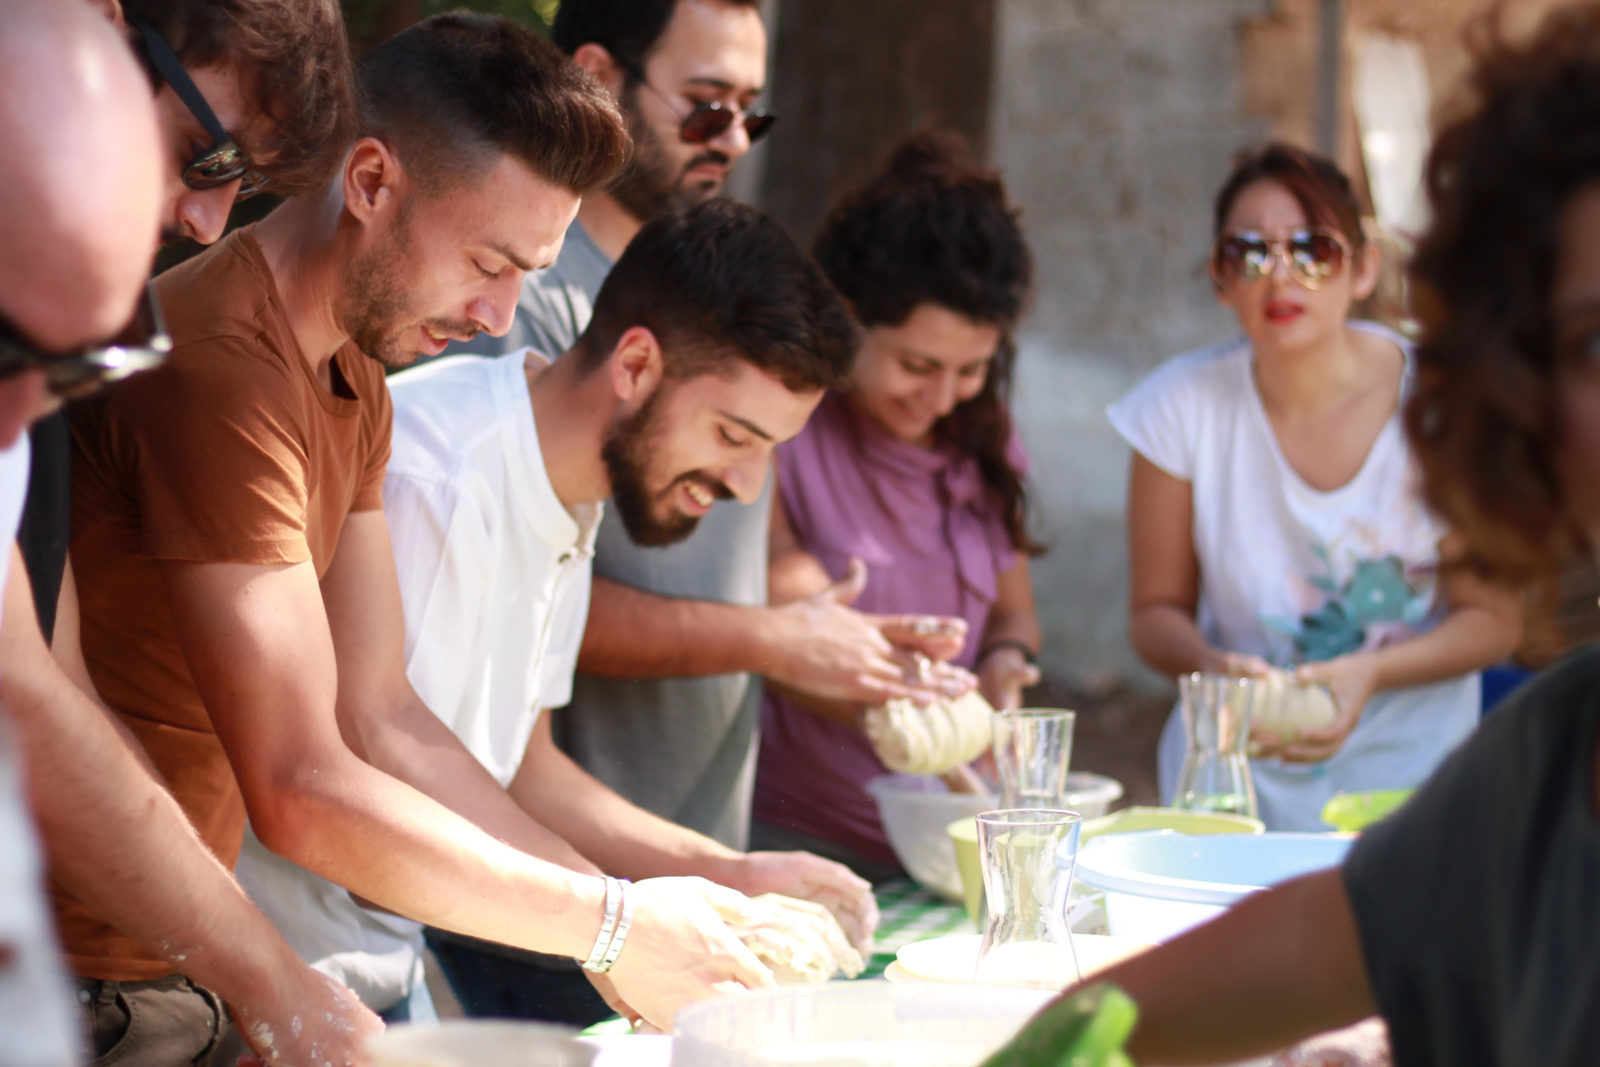 A group of people are standing around a table they are kneading dough and smiling